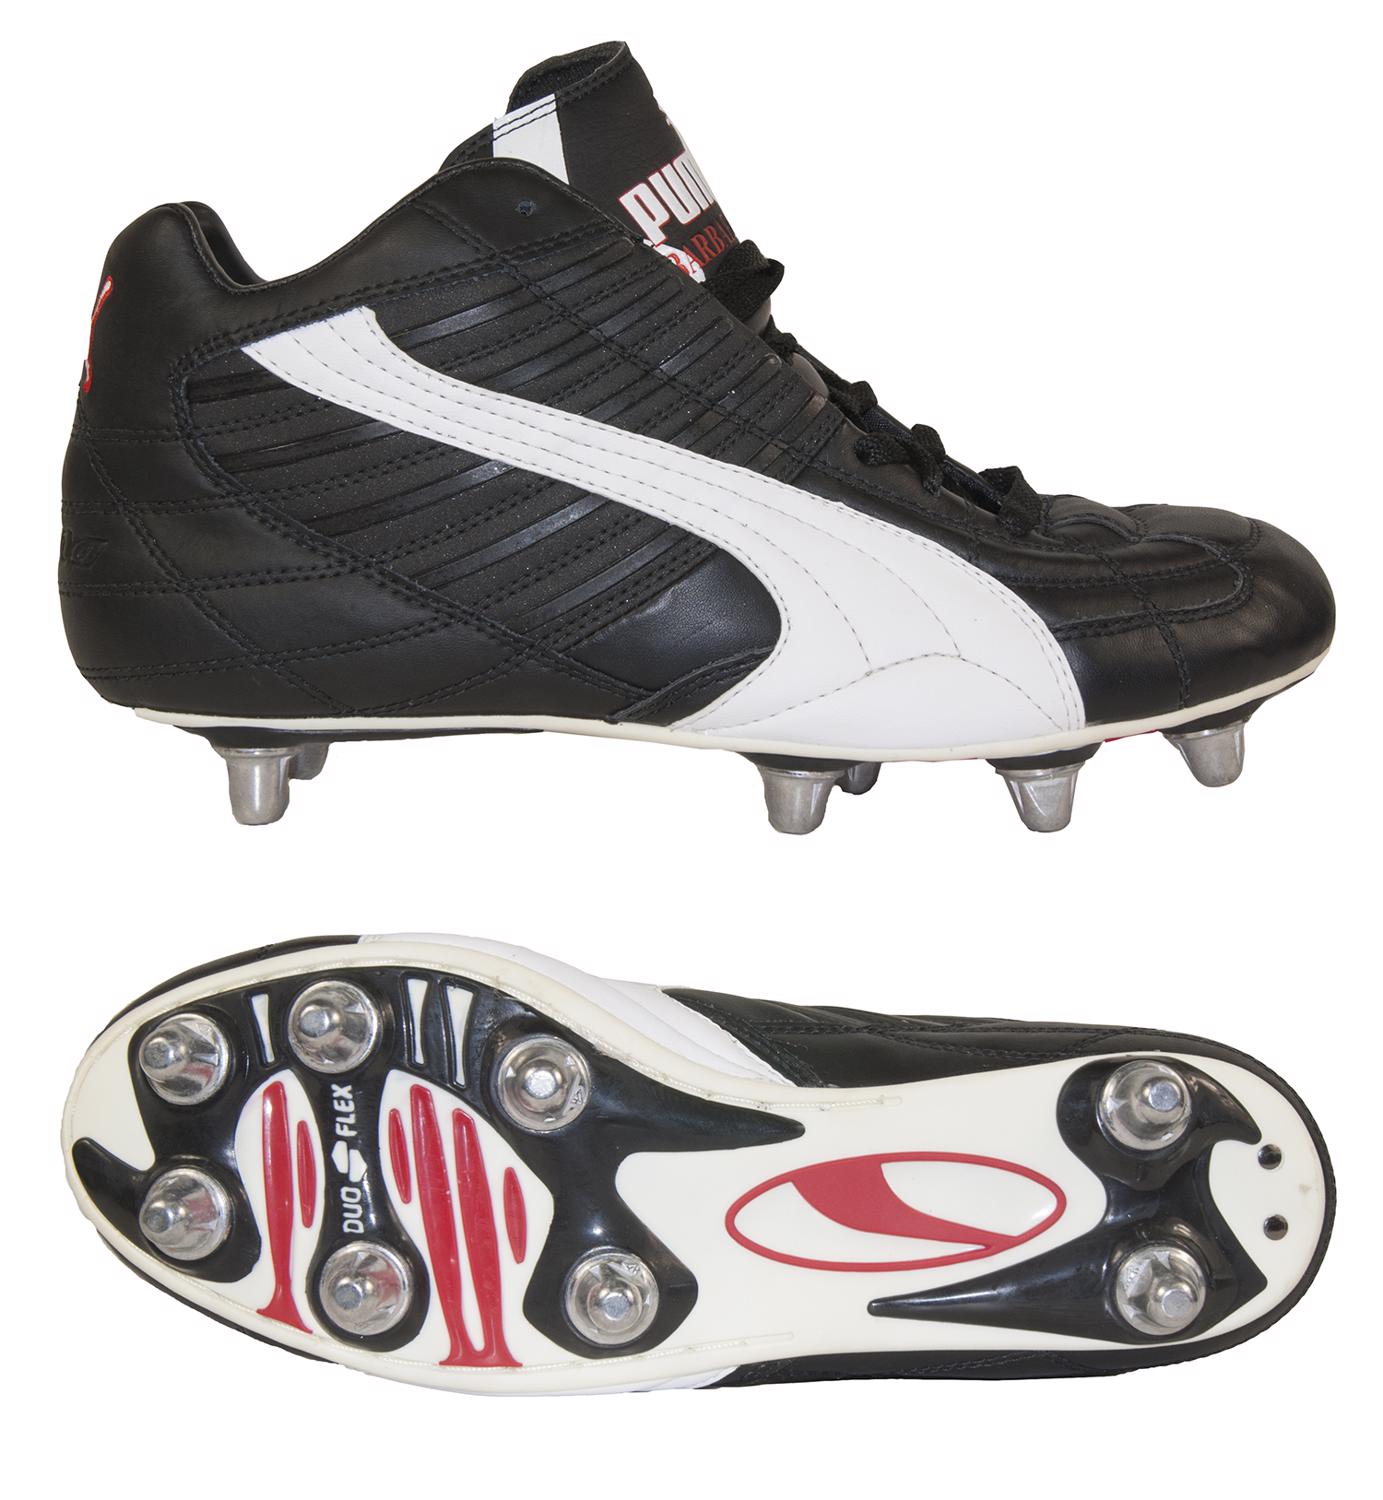 Puma Barbarian Hi soft toe rugby boots - CLEARANCE RUGBY BOOTS